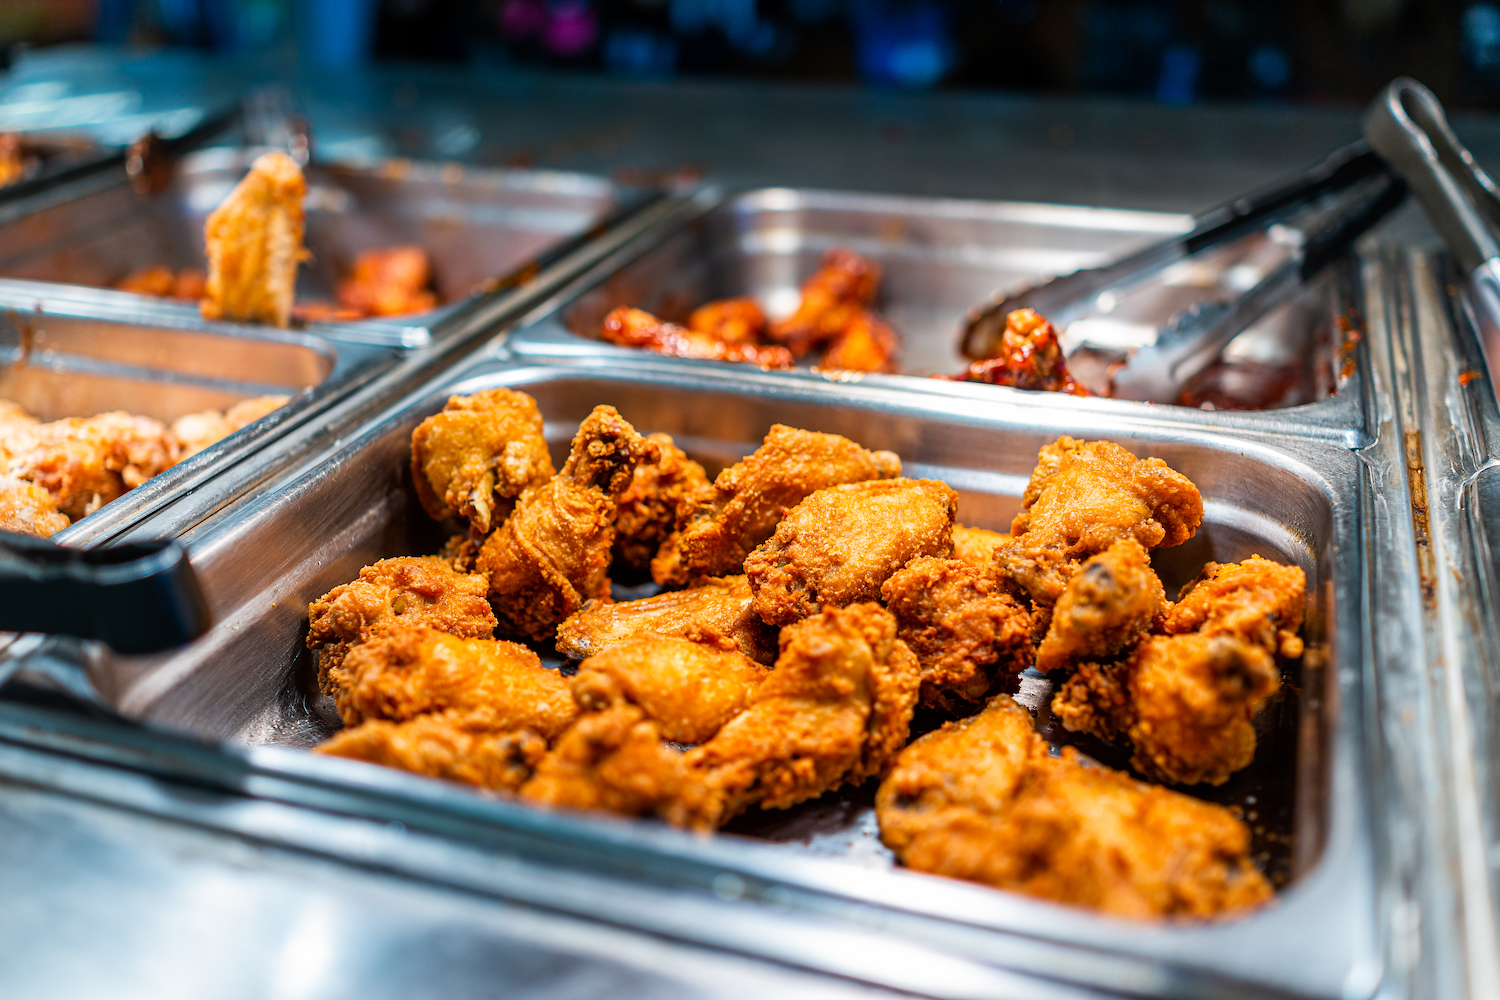 Fried chicken thighs buffet bar self serve with tongs in grocery store, restaurant or catering event with crisp skin